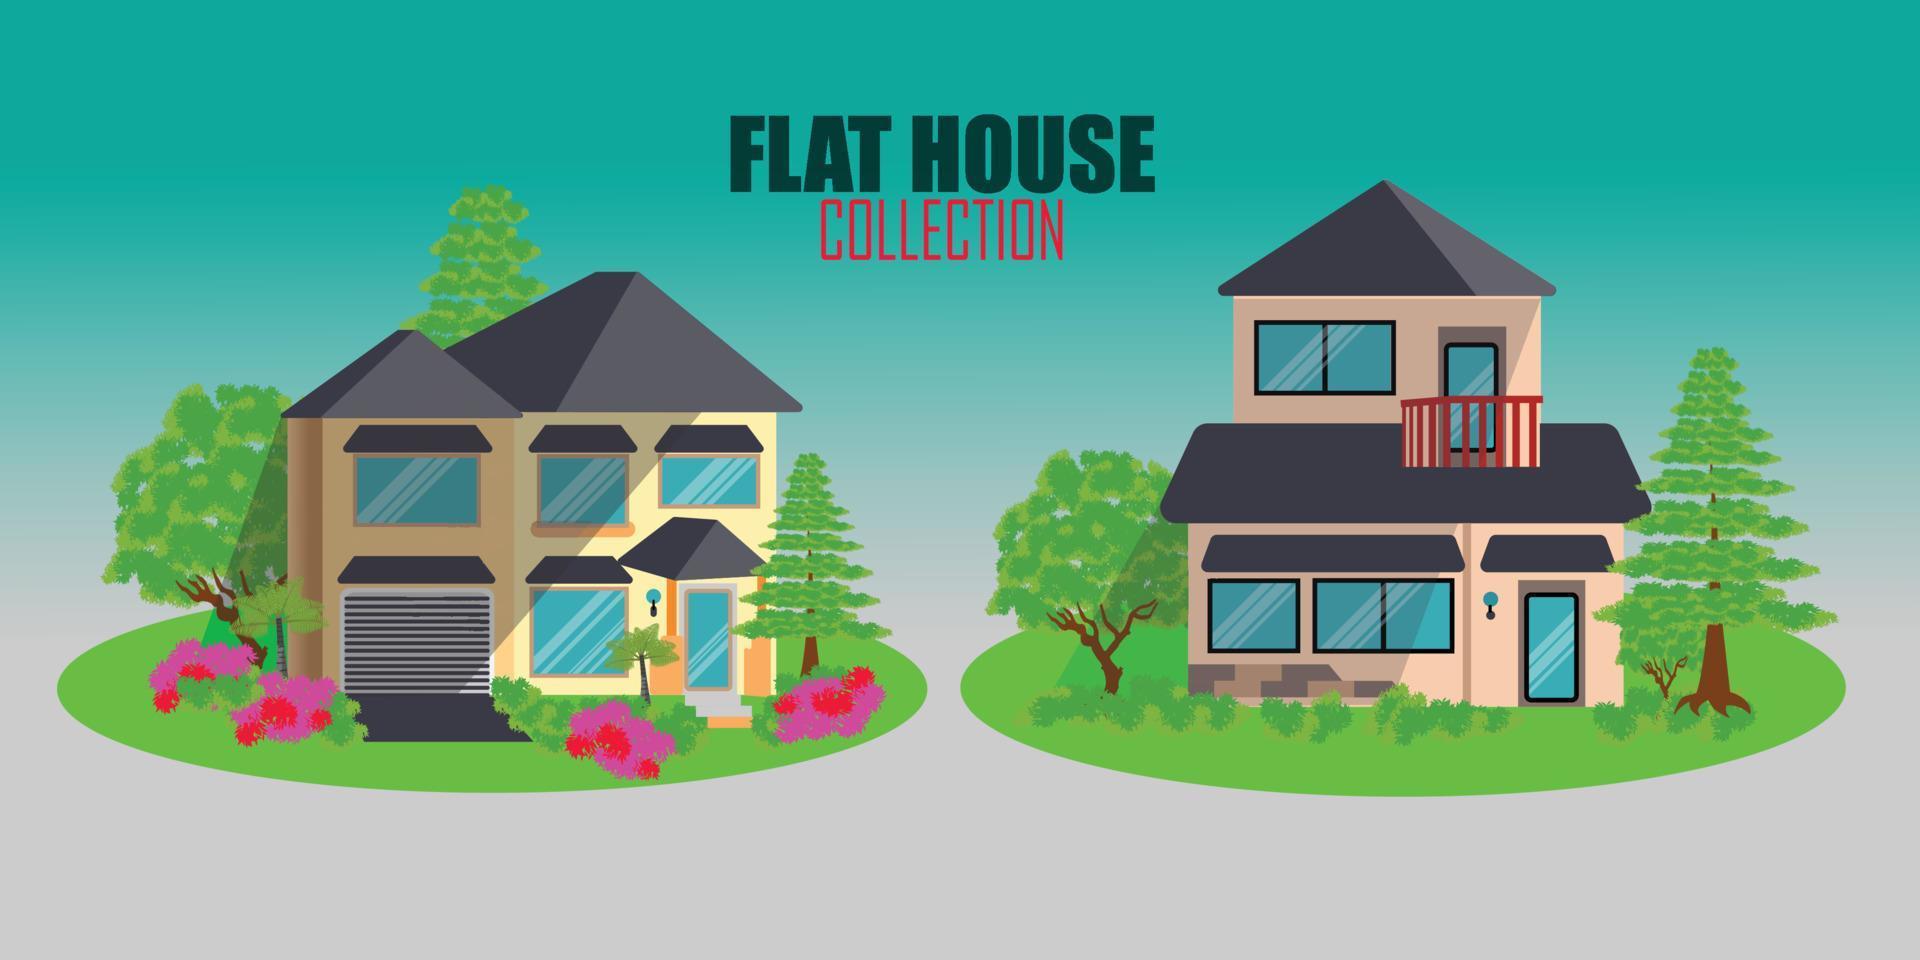 Flat house collection illustration vector